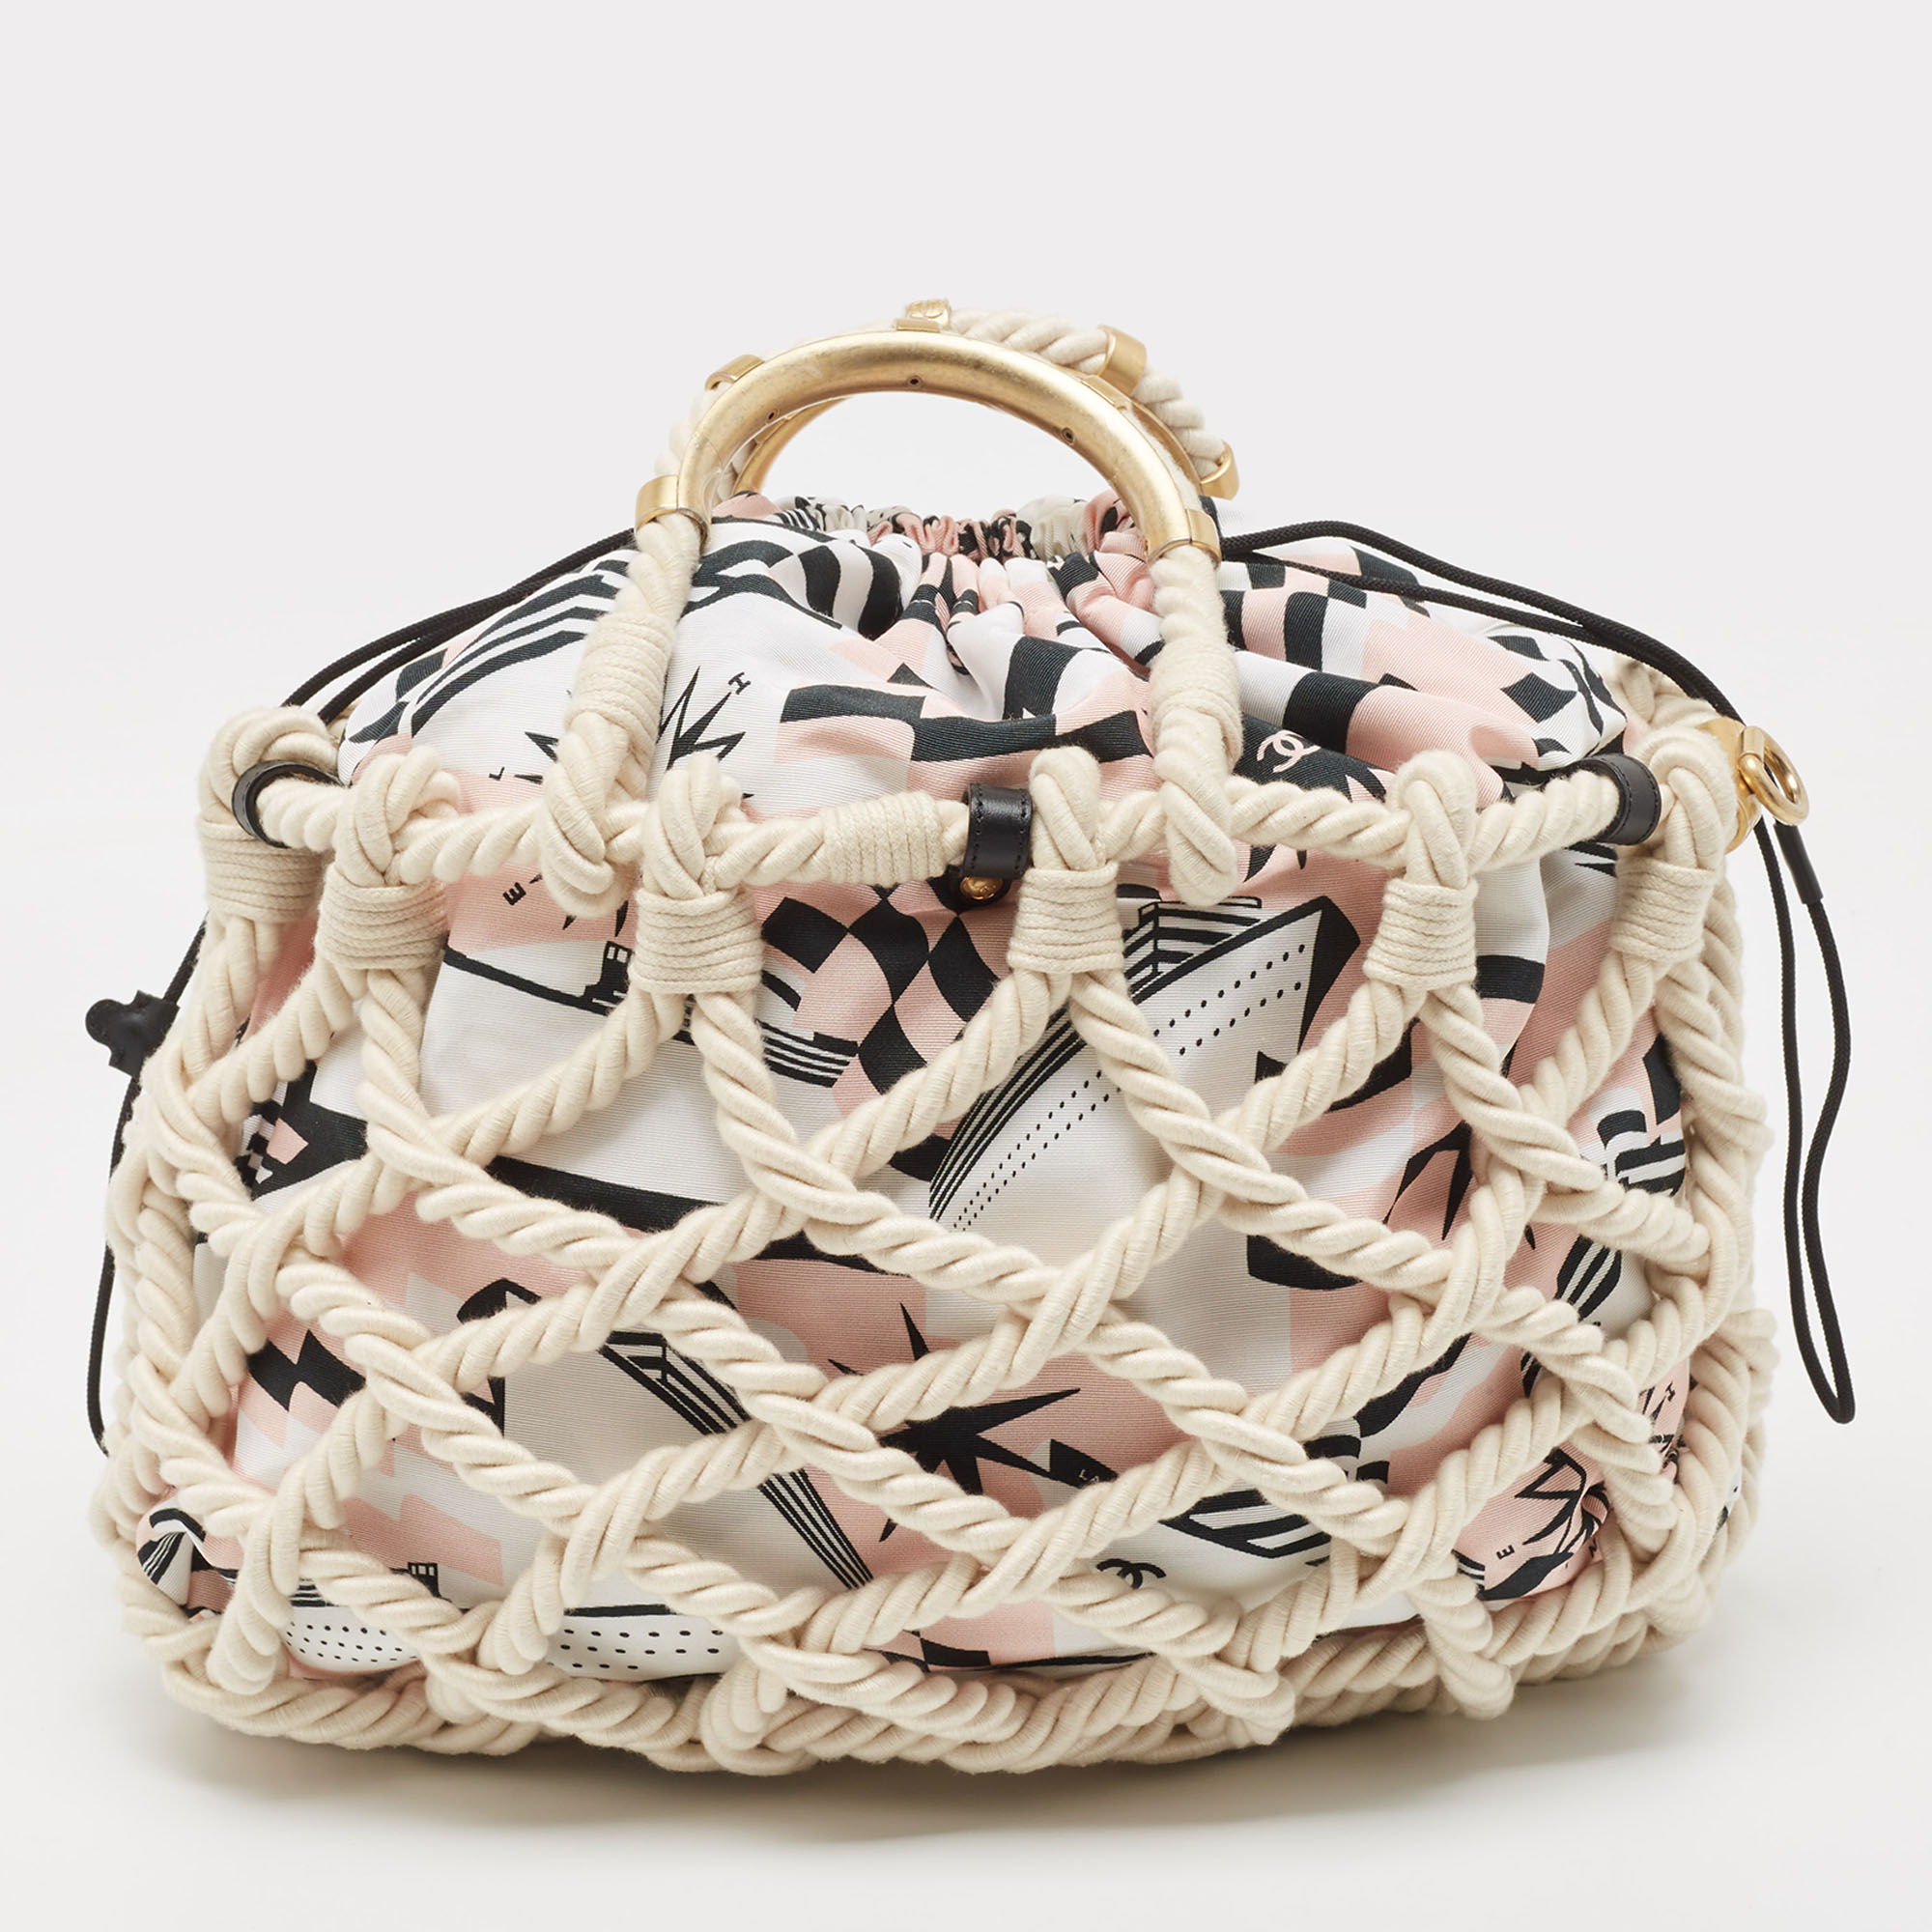 Chanel Multicolor Printed Fabric And Rope Shopper Tote